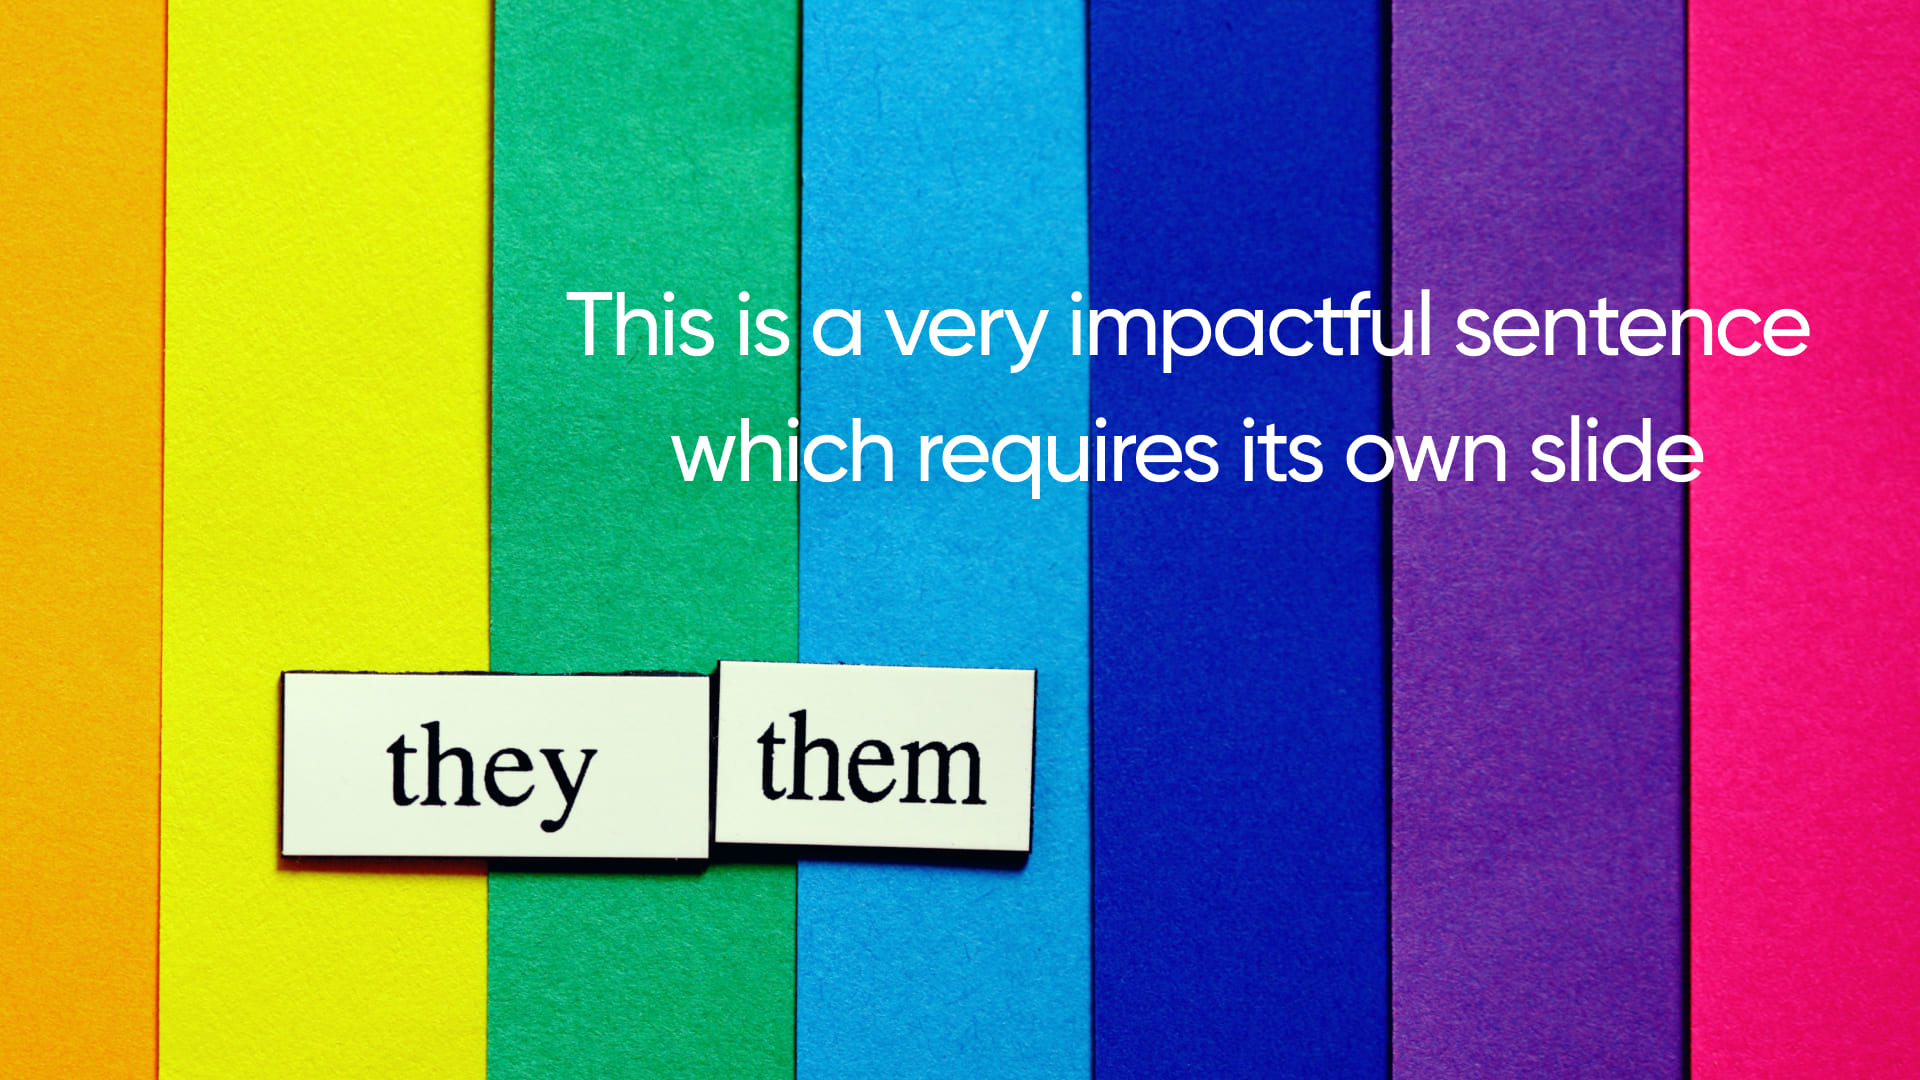 3 Free LGBT Powerpoint Template.